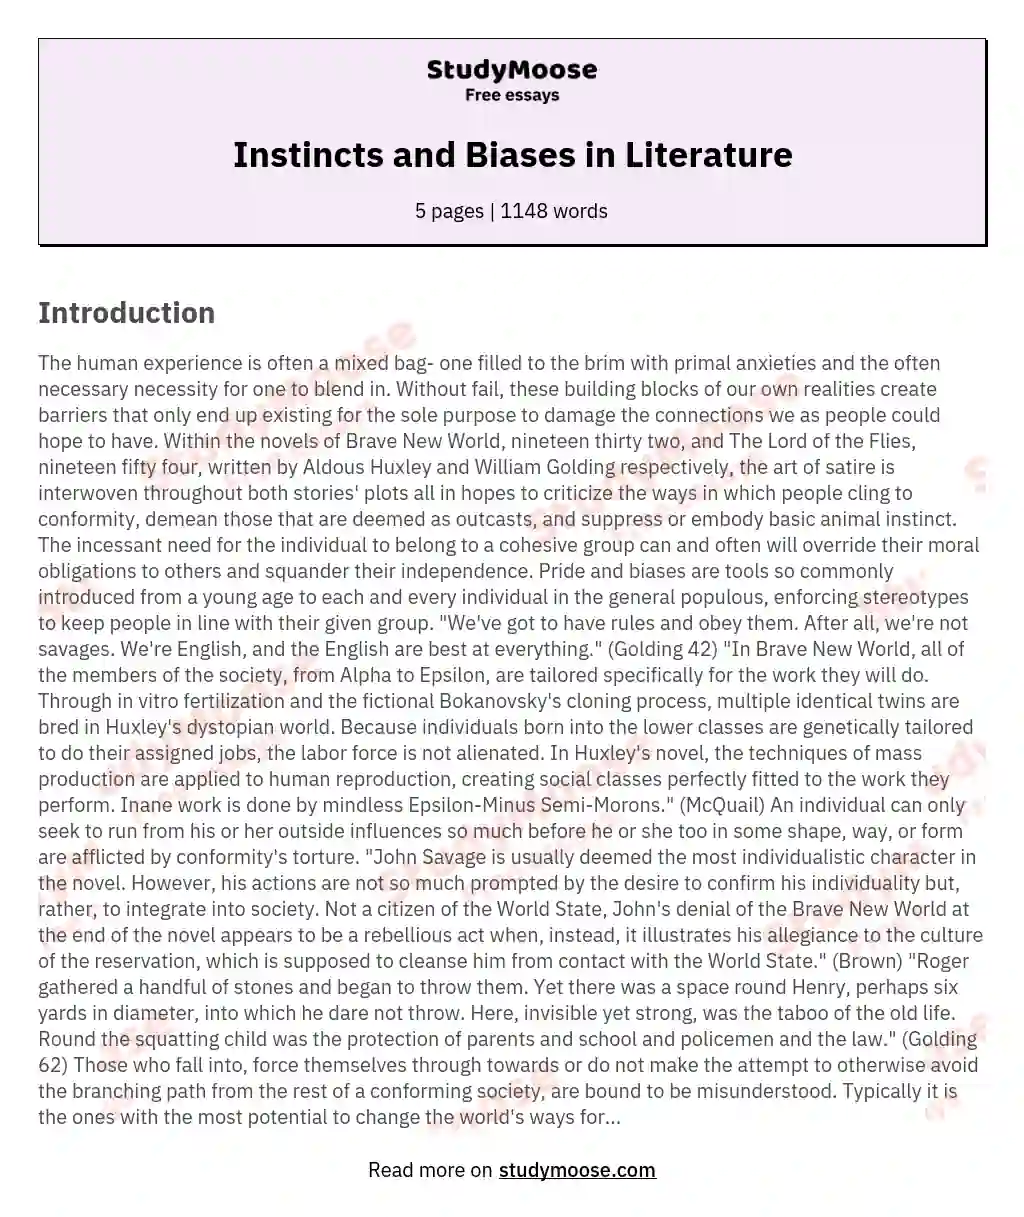 Instincts and Biases in Literature